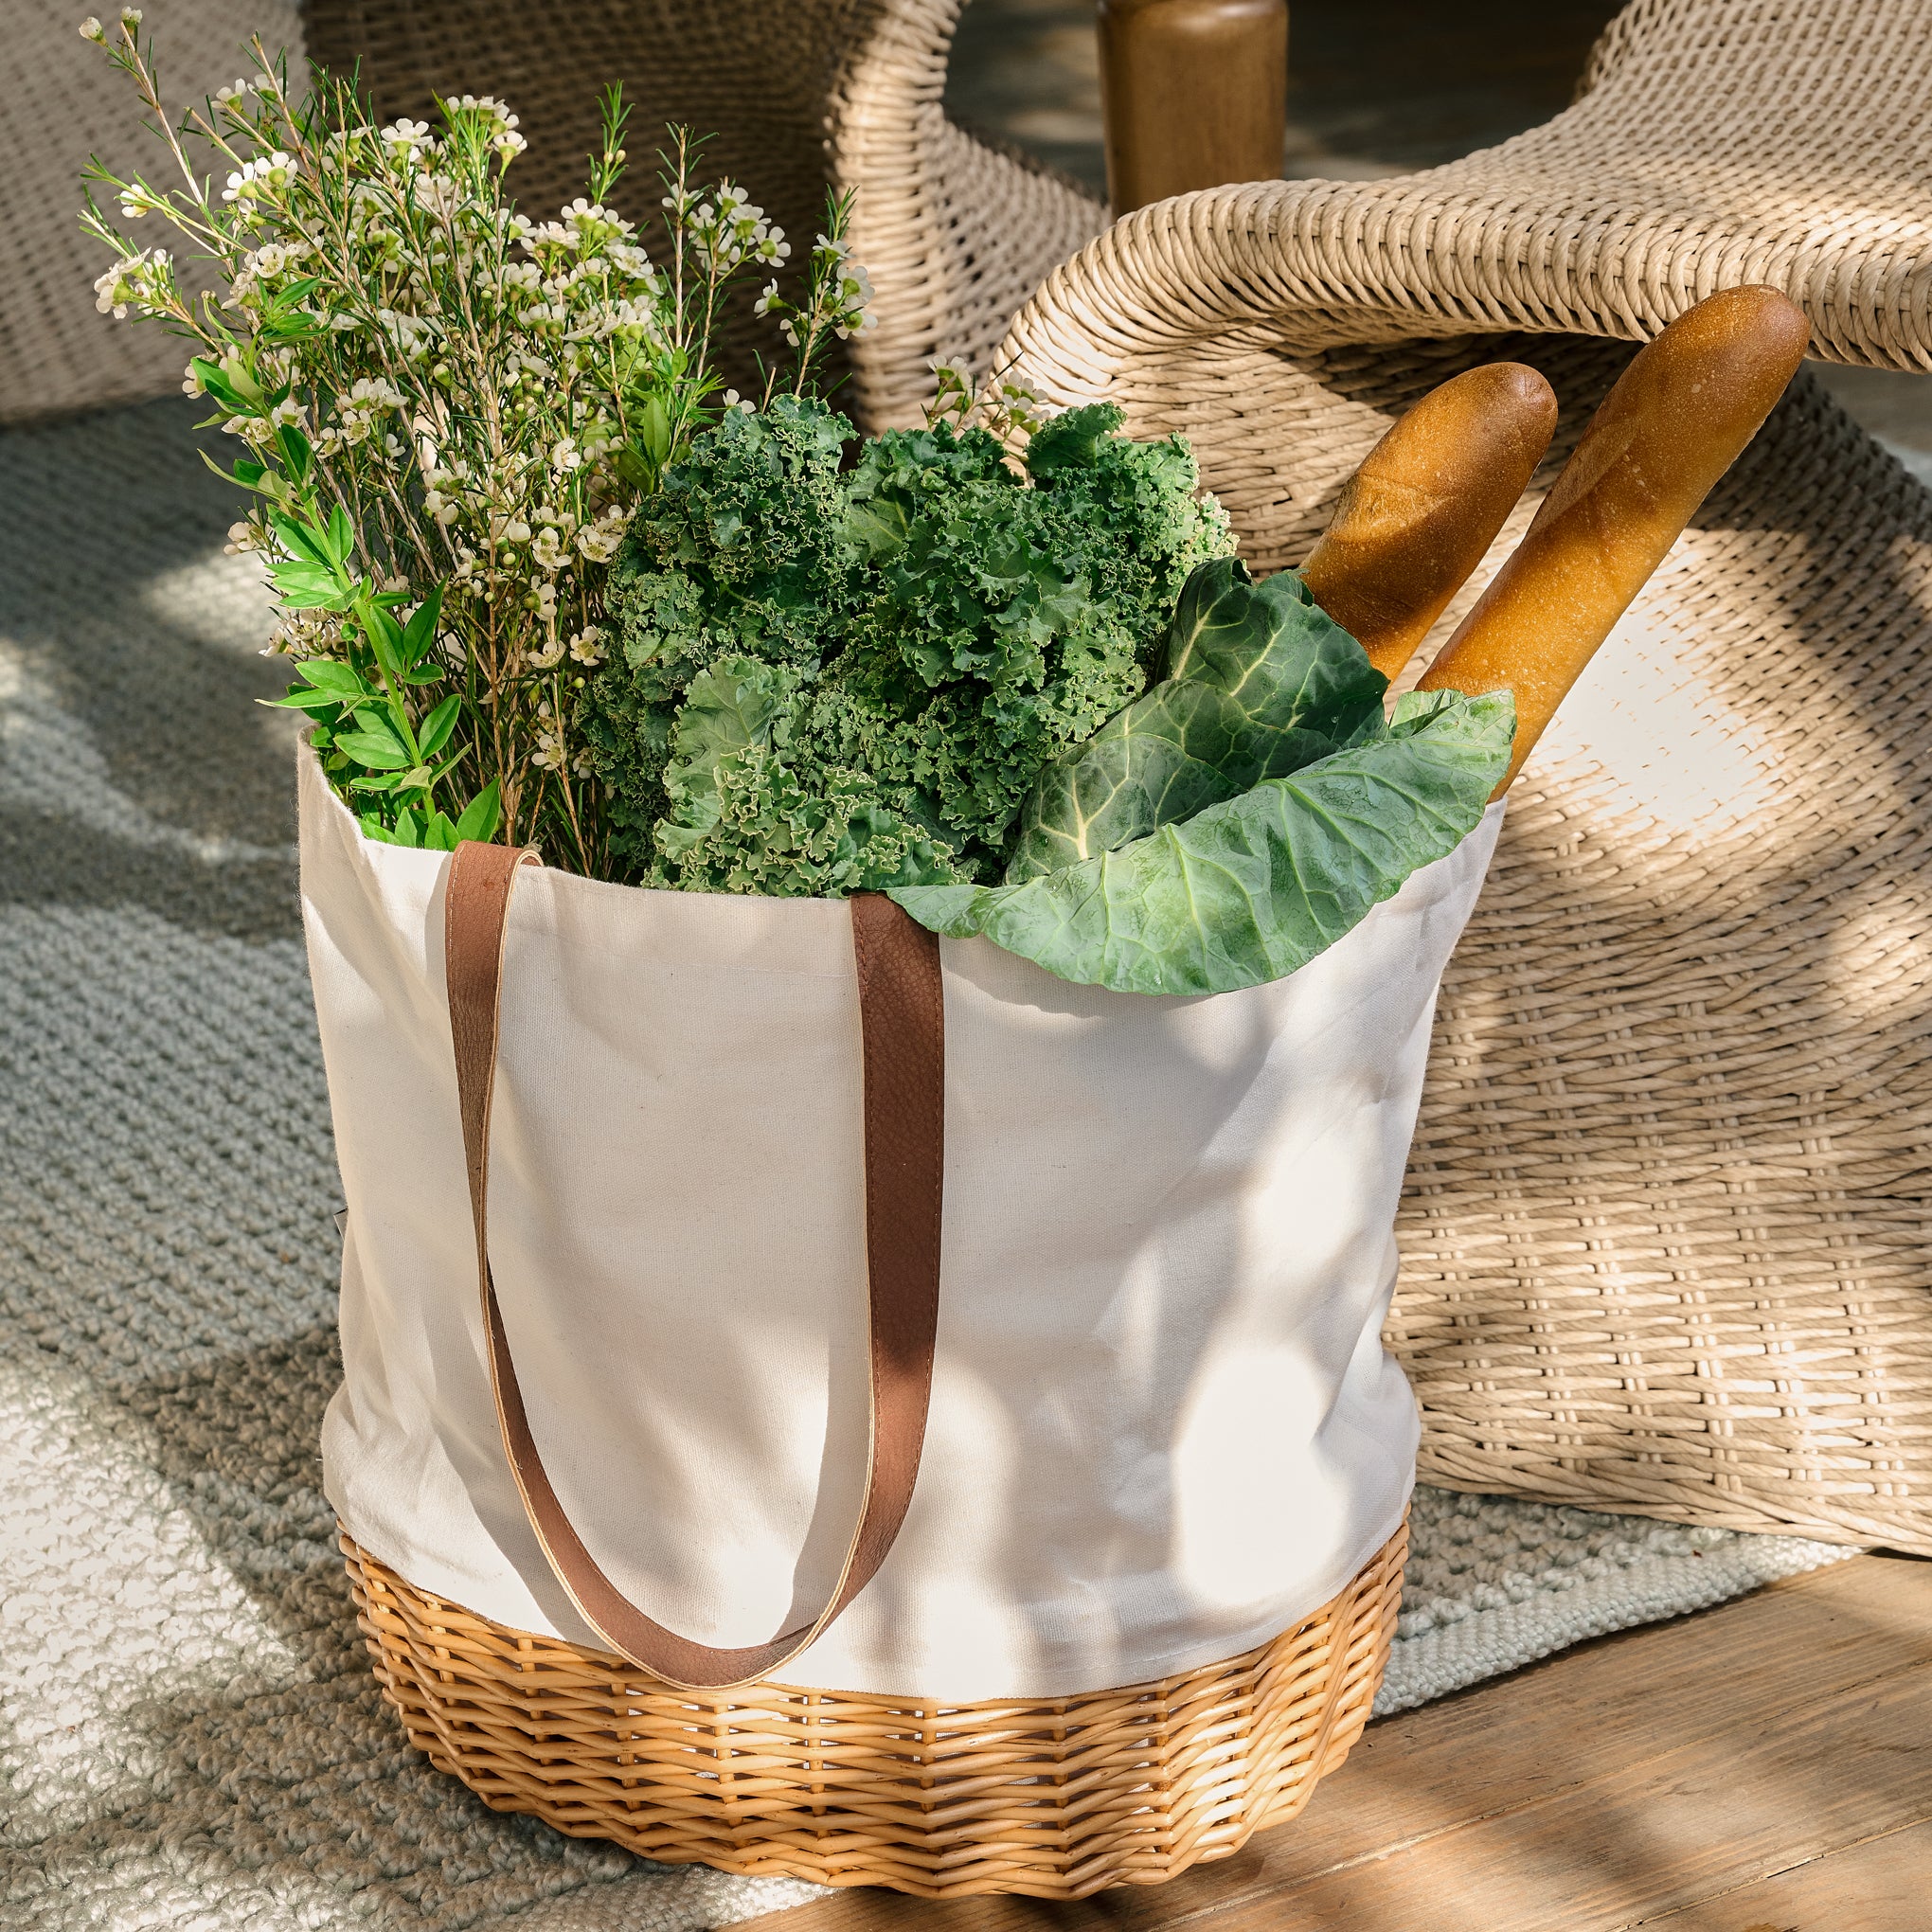 Coronado Willow + Canvas Basket Tote with kale and bread inside